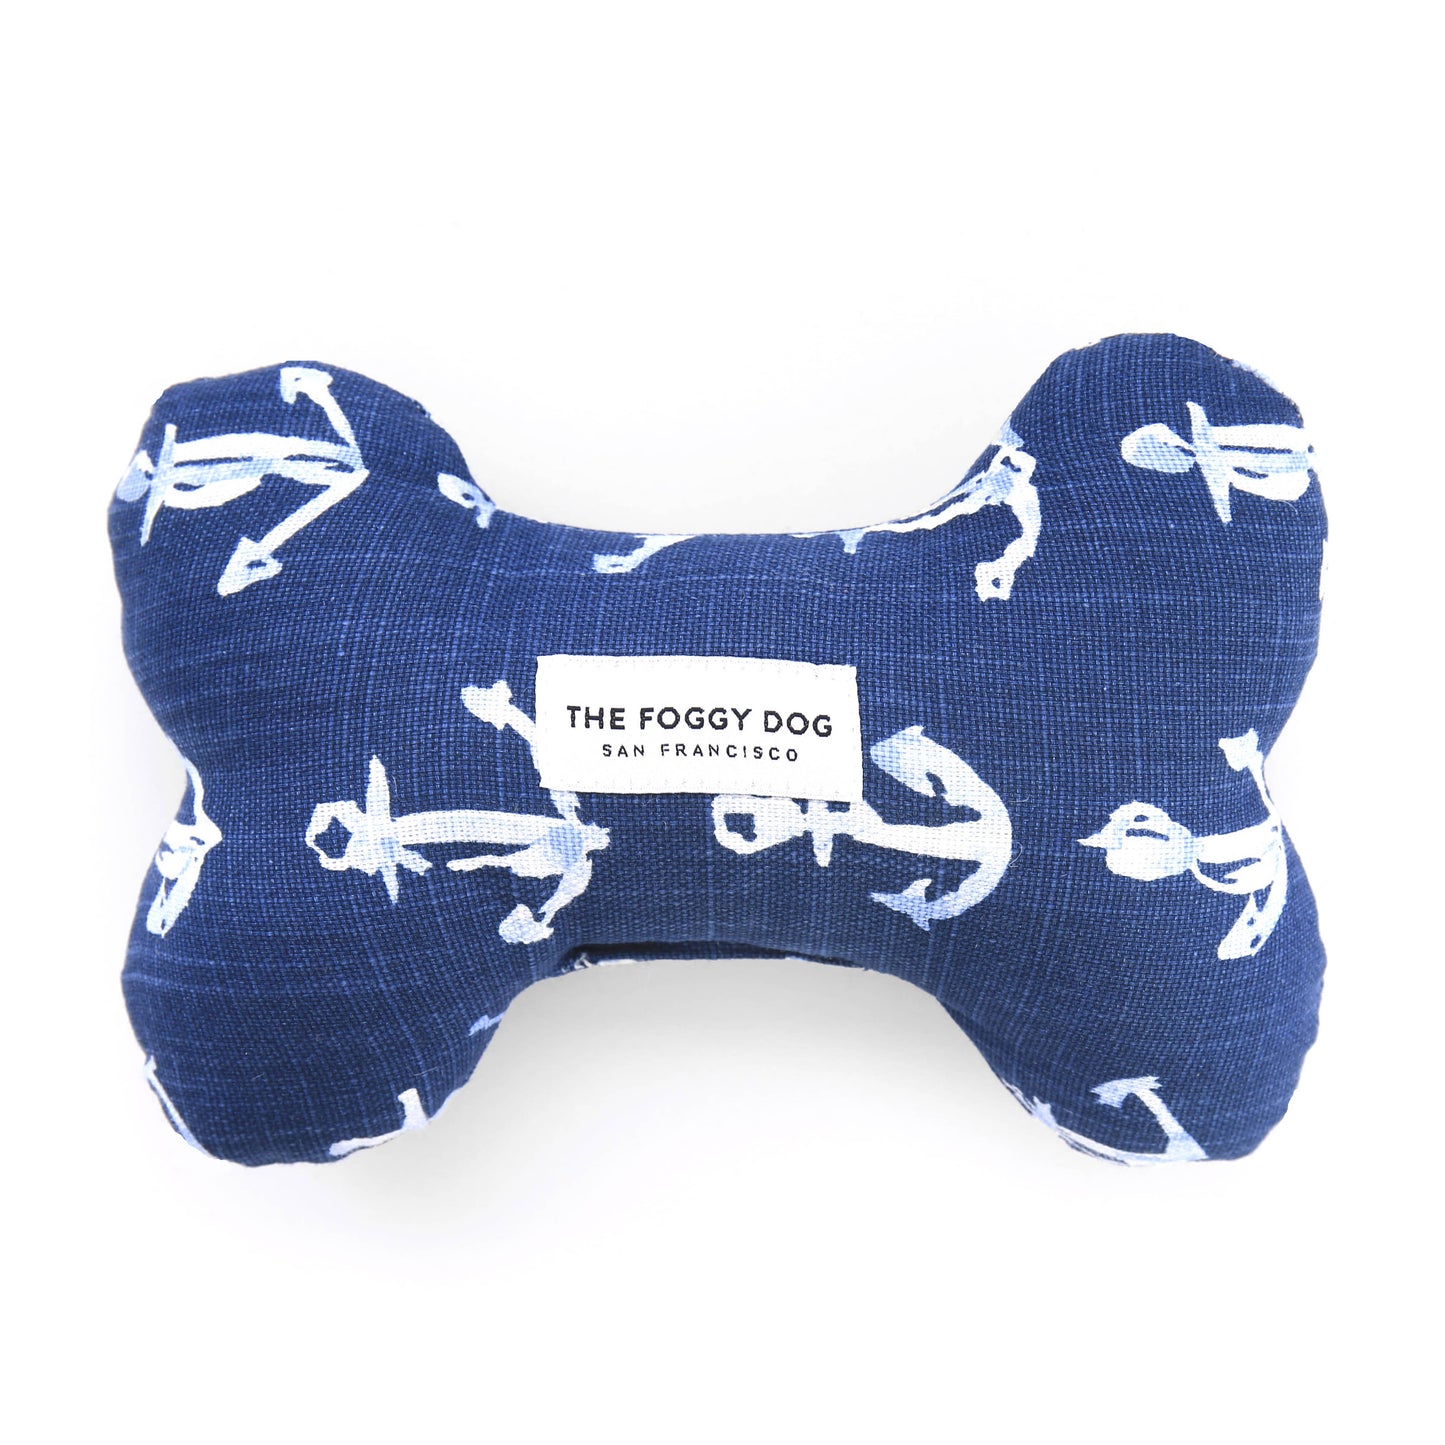 Down By The Sea Dog Bone Squeaky Toy